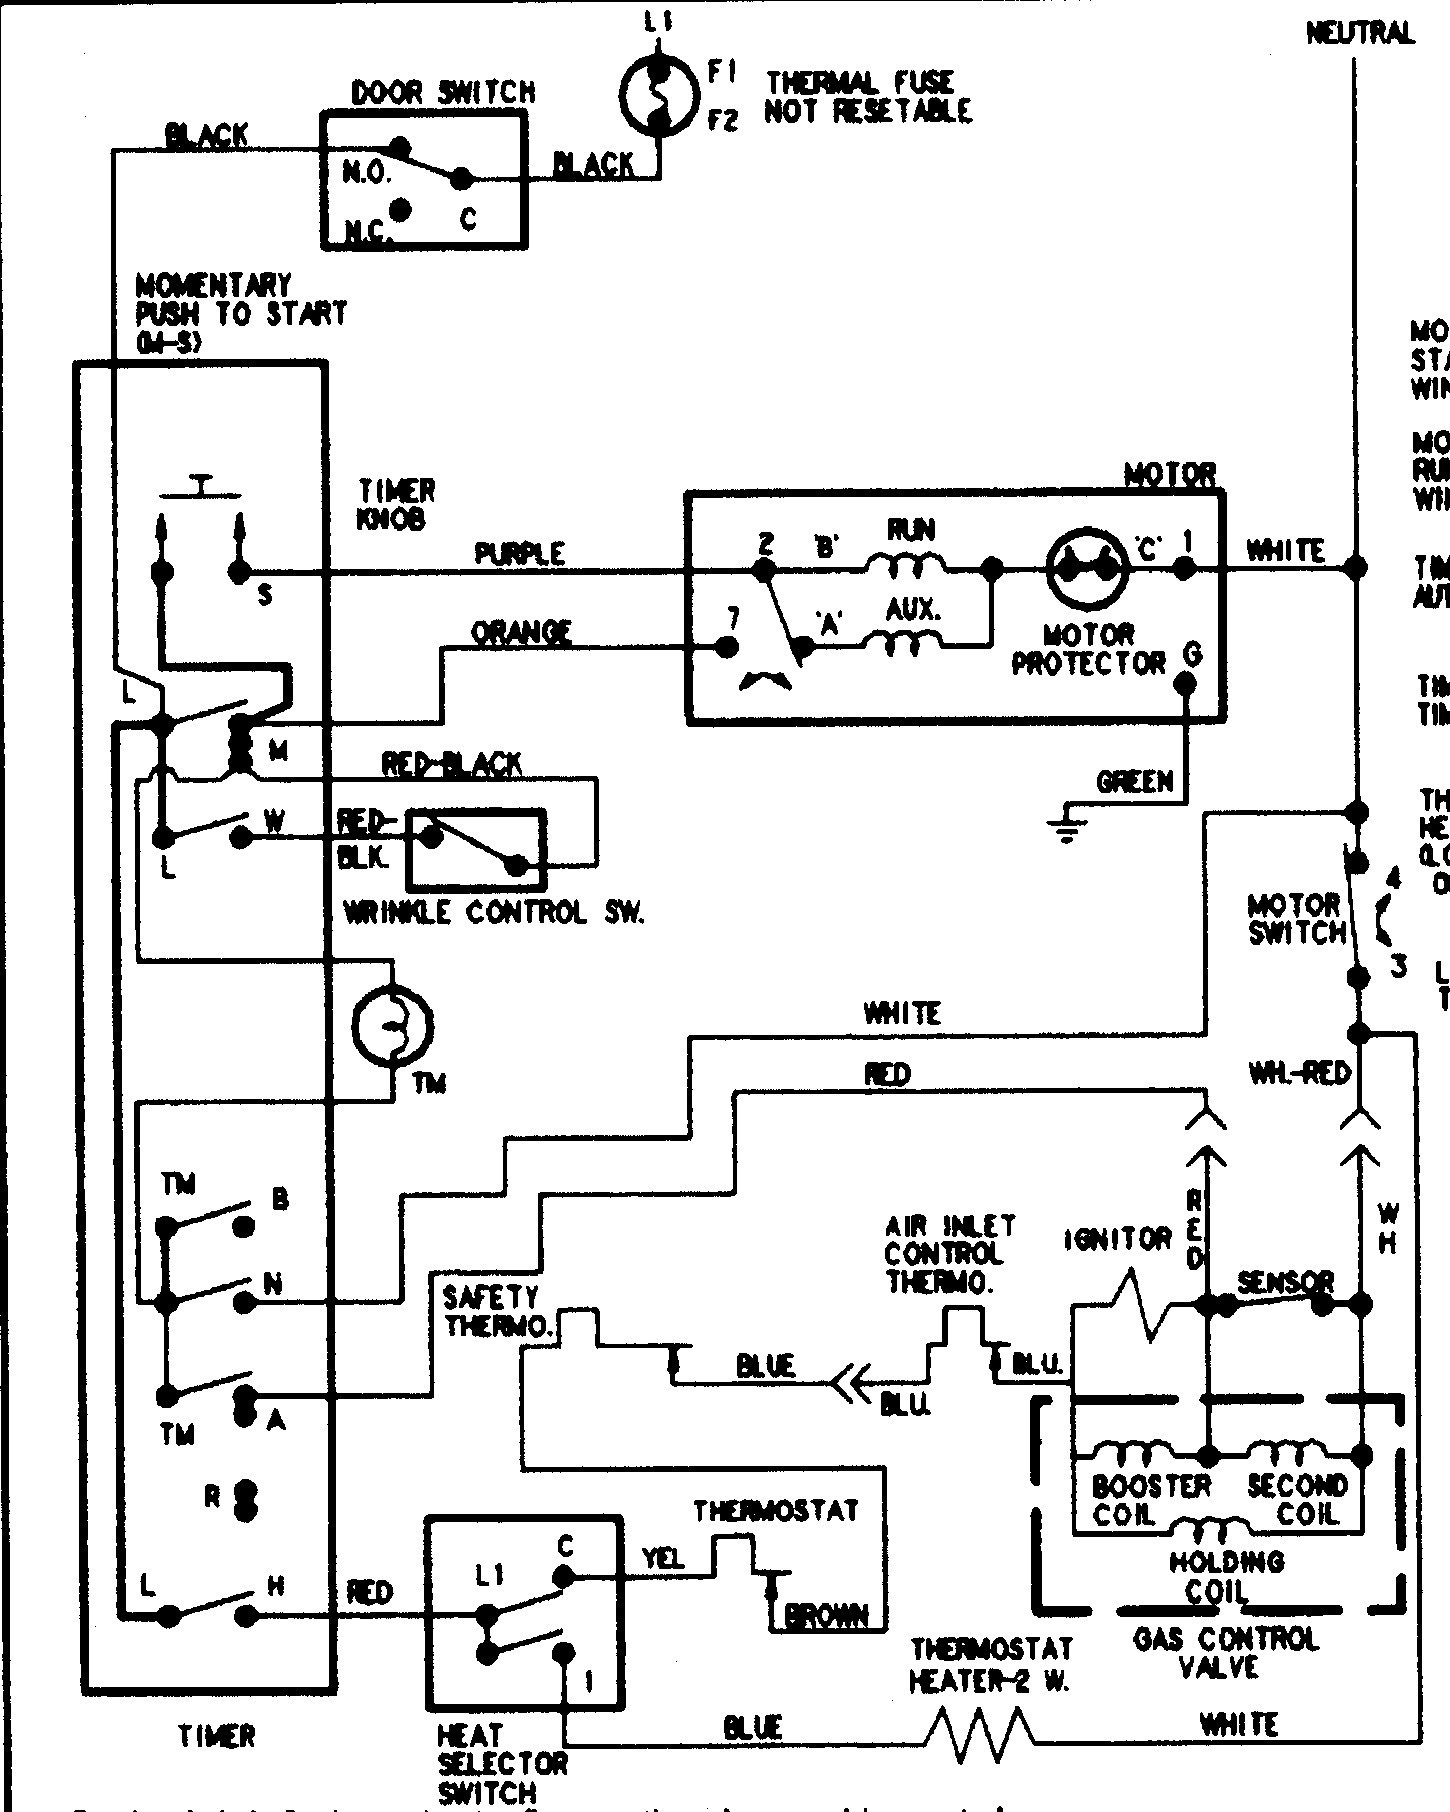 Amana Dryer Parts Diagram Wiring Diagram for Ge Dryer Door Switch Reference Diagram Amana Of Amana Dryer Parts Diagram